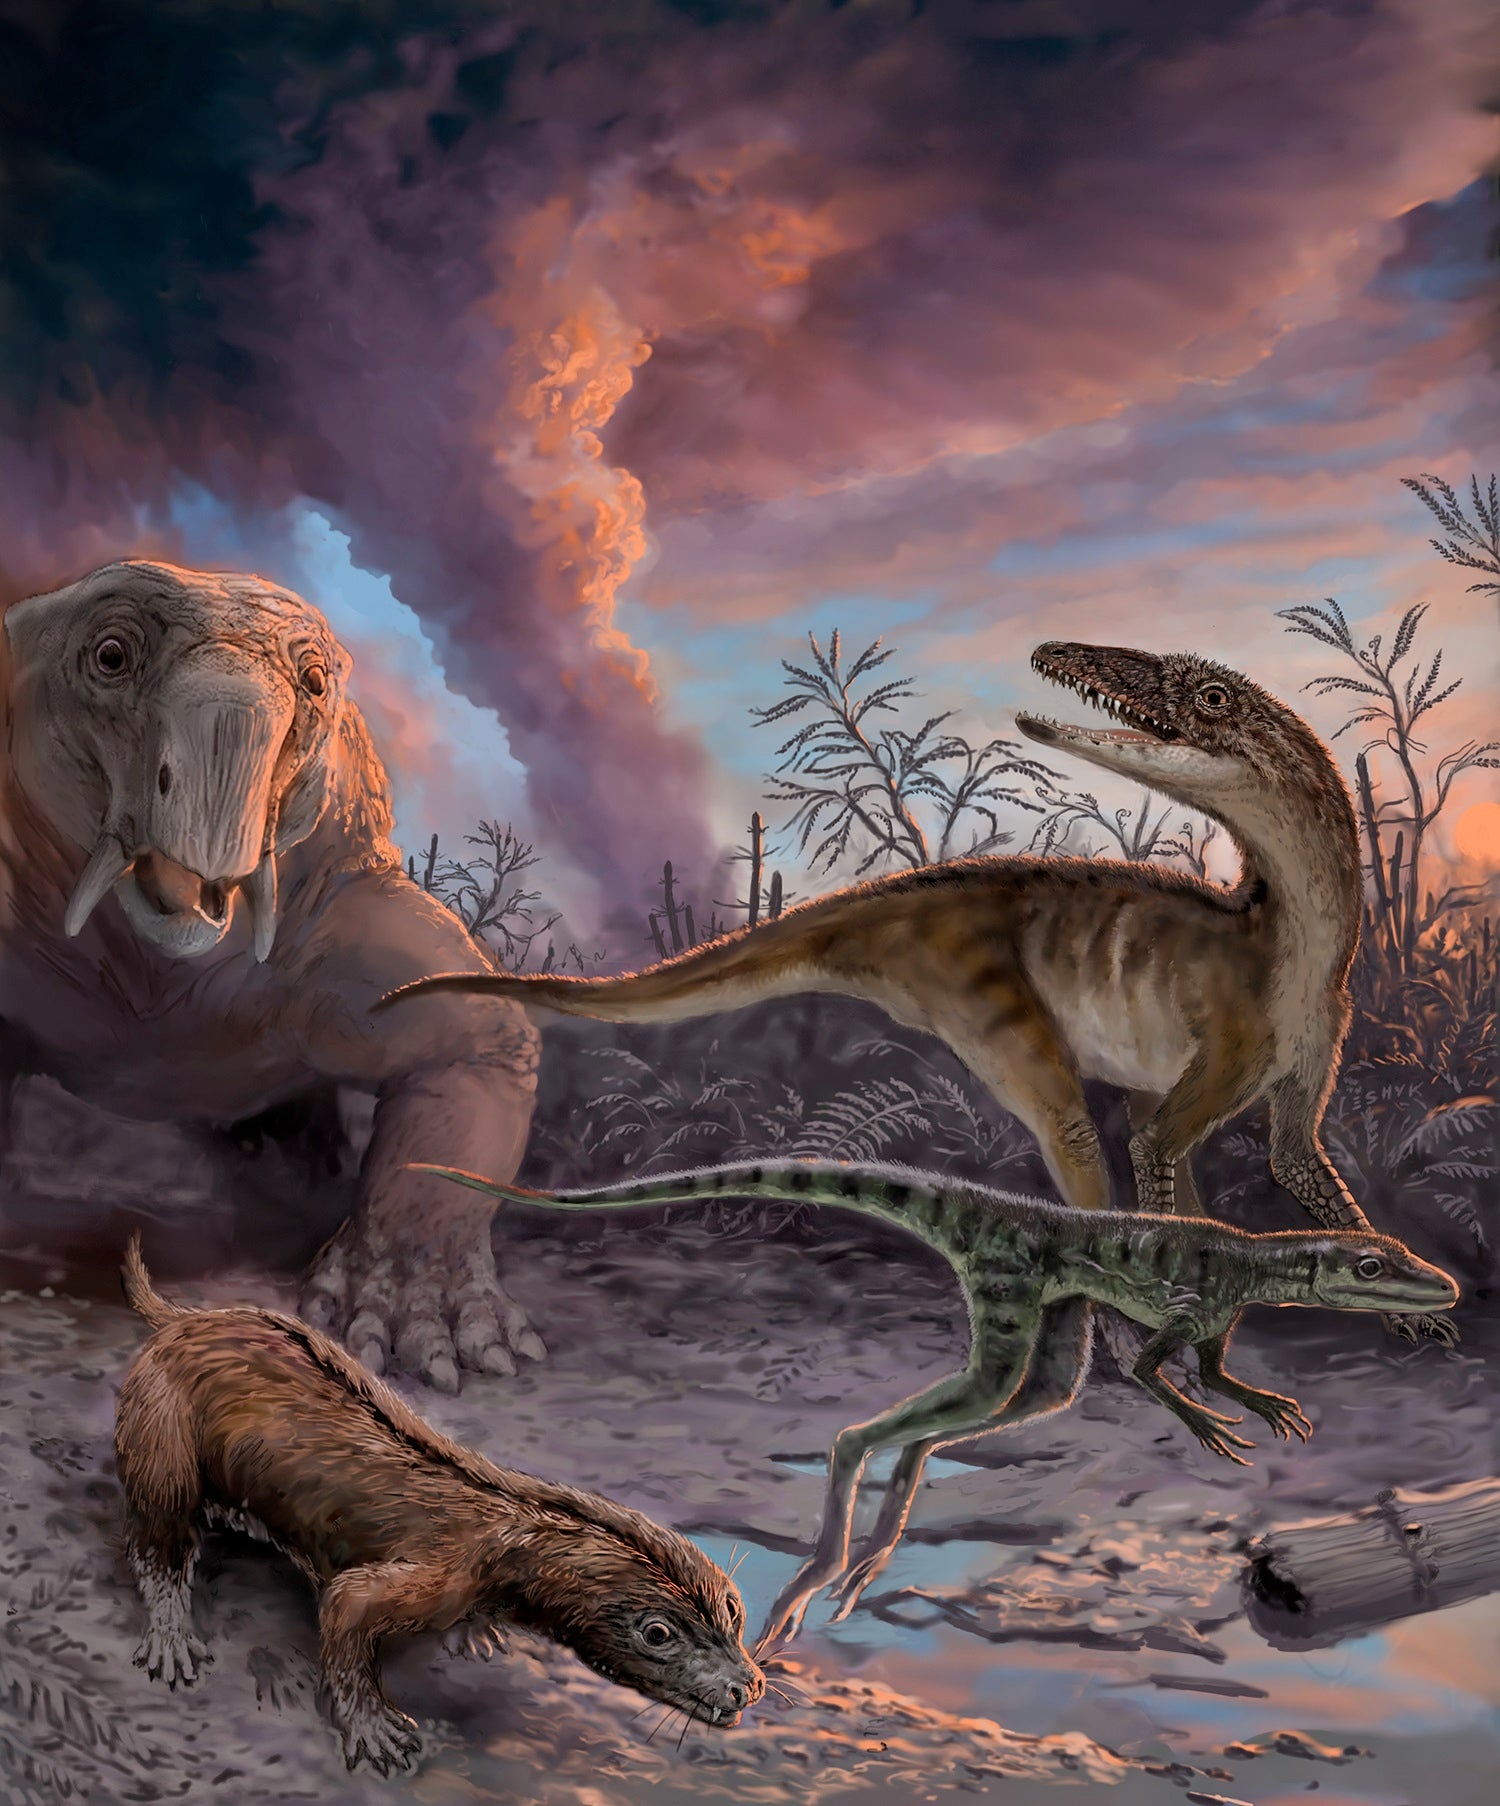 The Earth may be warming, and dinosaurs could be ruling it.